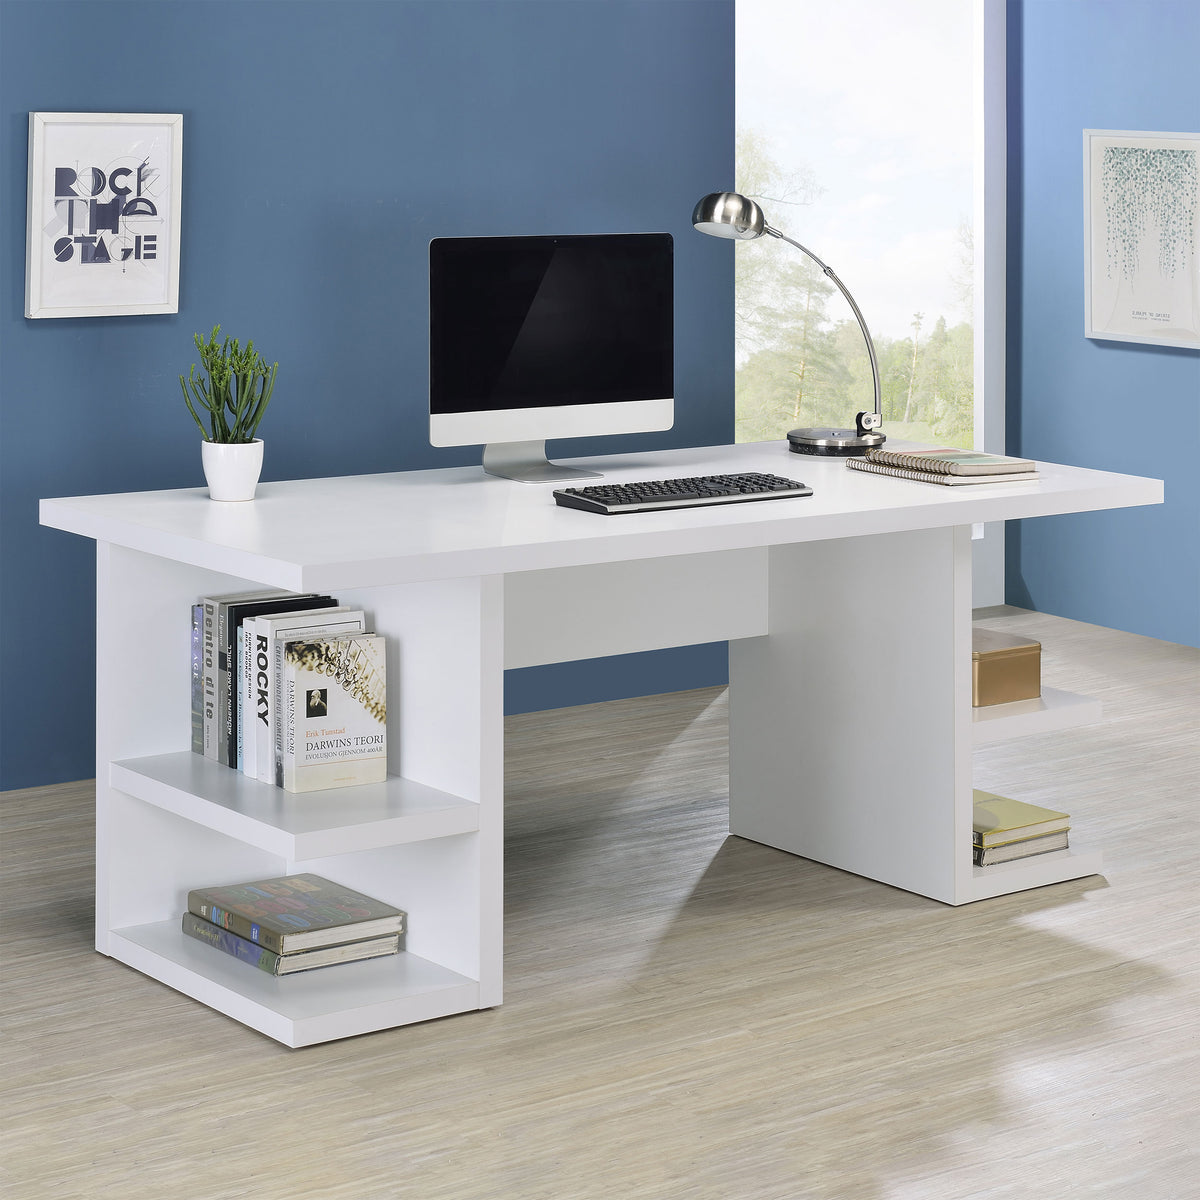 Alice Writing Desk White with Open Shelves  Las Vegas Furniture Stores